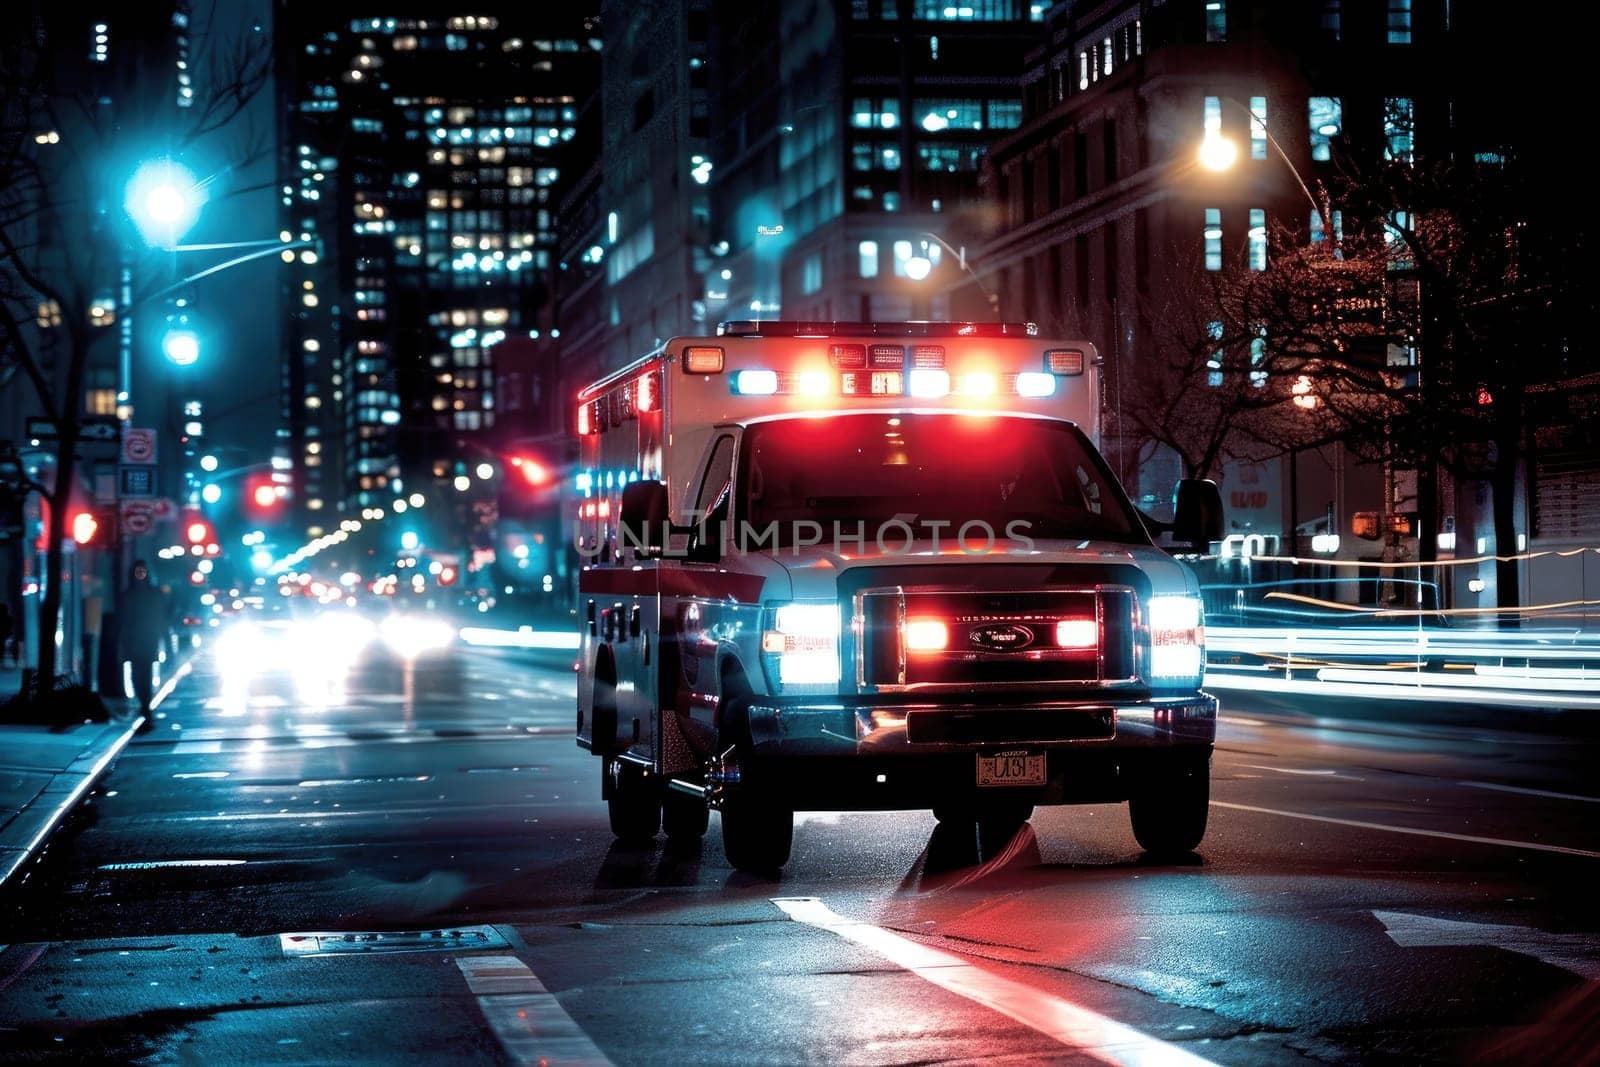 An ambulance with flashing lights and sirens races down a city street at night